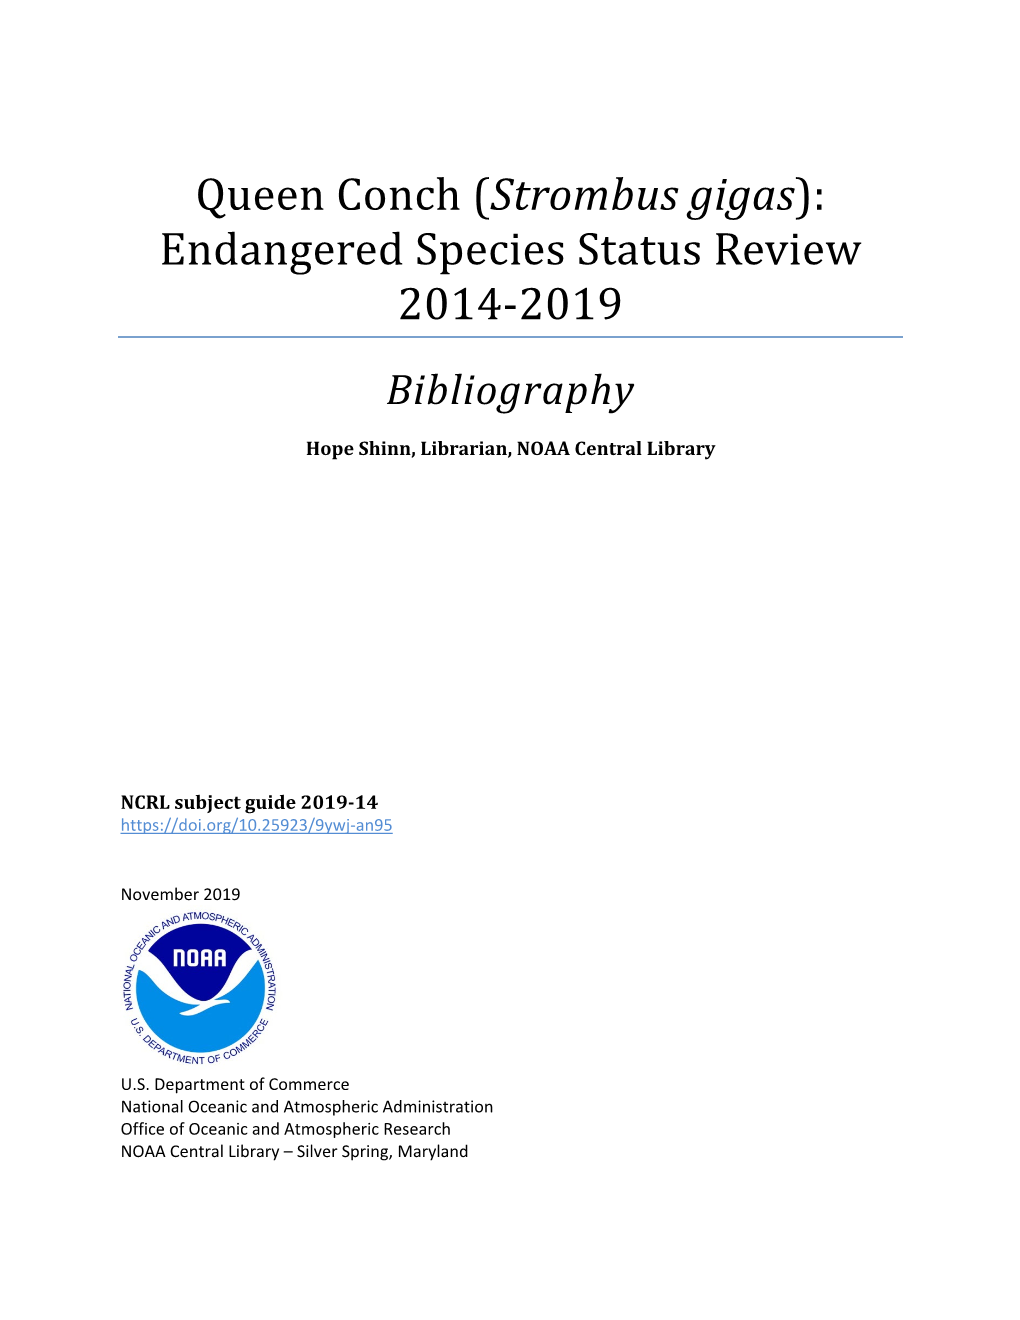 Queen Conch (Strombus Gigas): Endangered Species Status Review 2014-2019 Bibliography